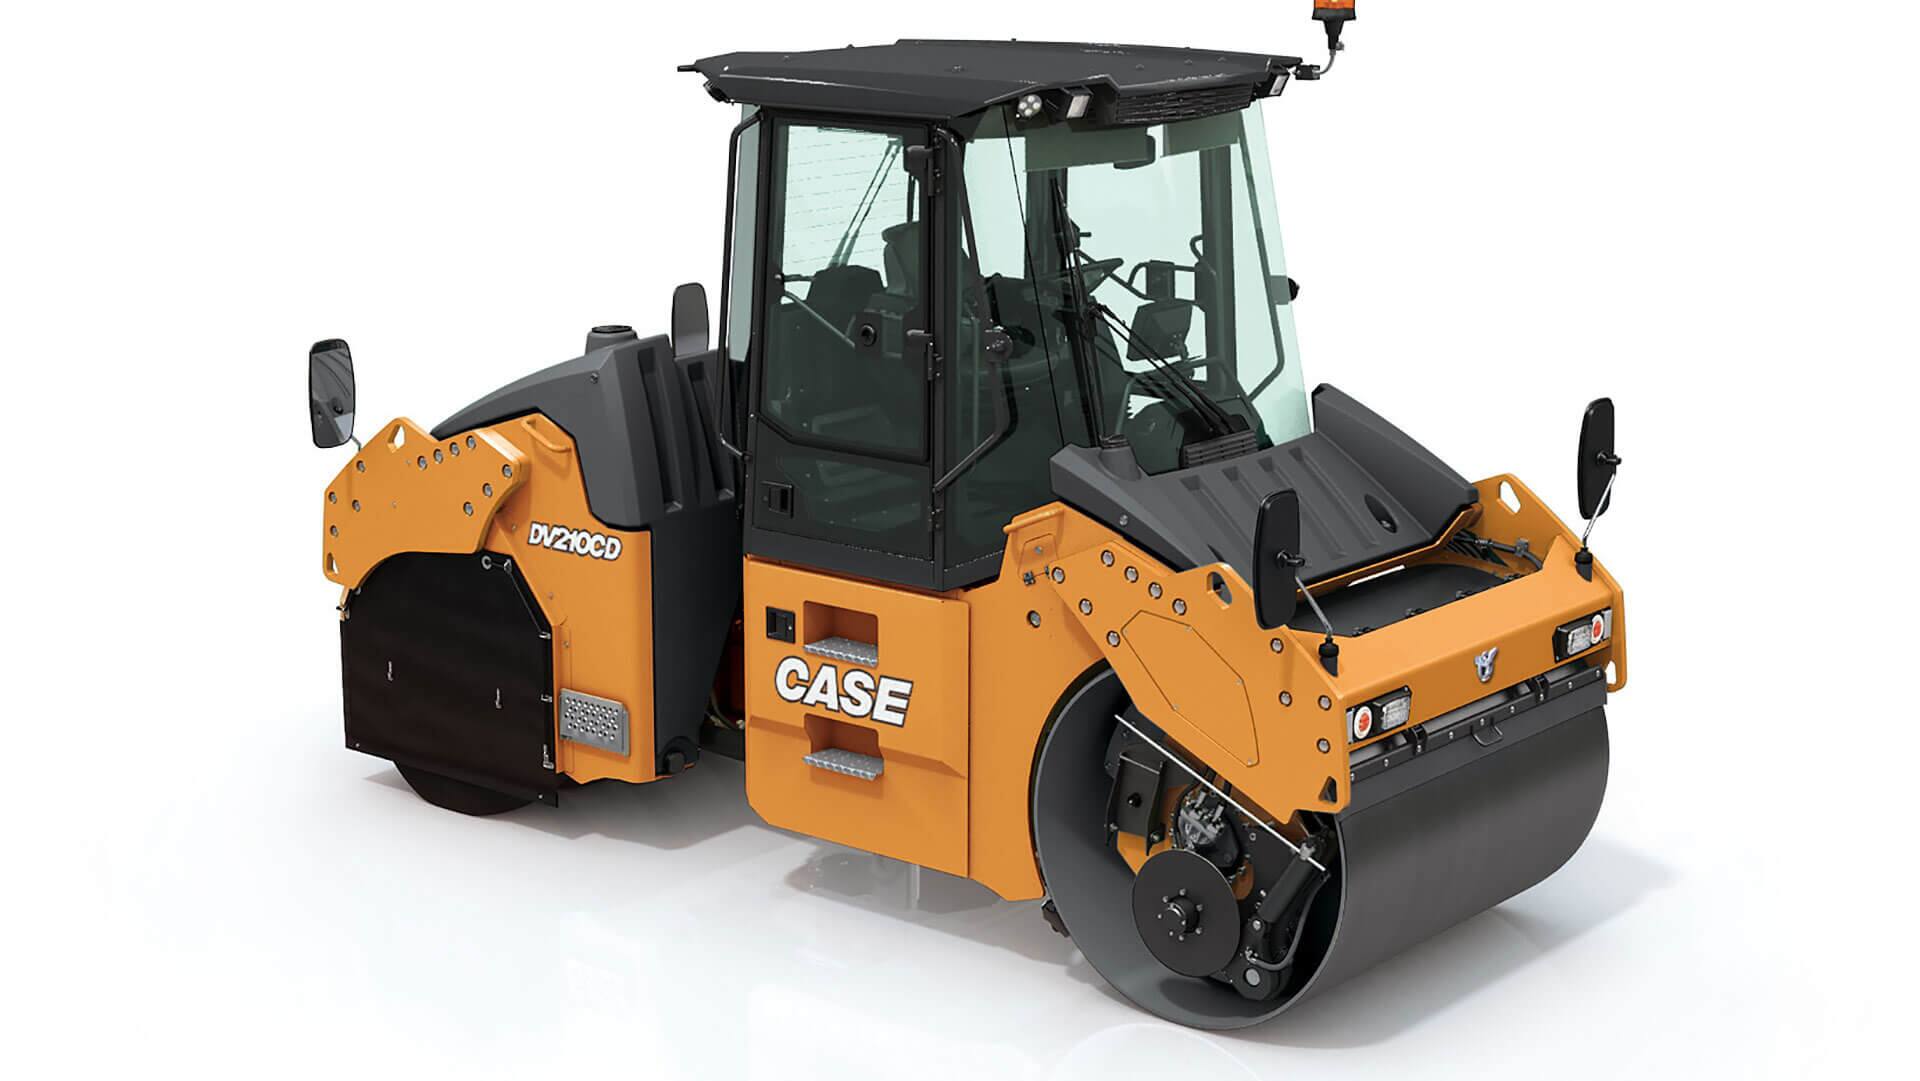 https://assets.cnhindustrial.com/casece/nafta/assets/Products/Compaction-Equipment/Double-Drum-Rollers/DV210CD_ARX_110K_T4i_Heavy_Tandem_Roller__22.jpg?Width=800&Height=450